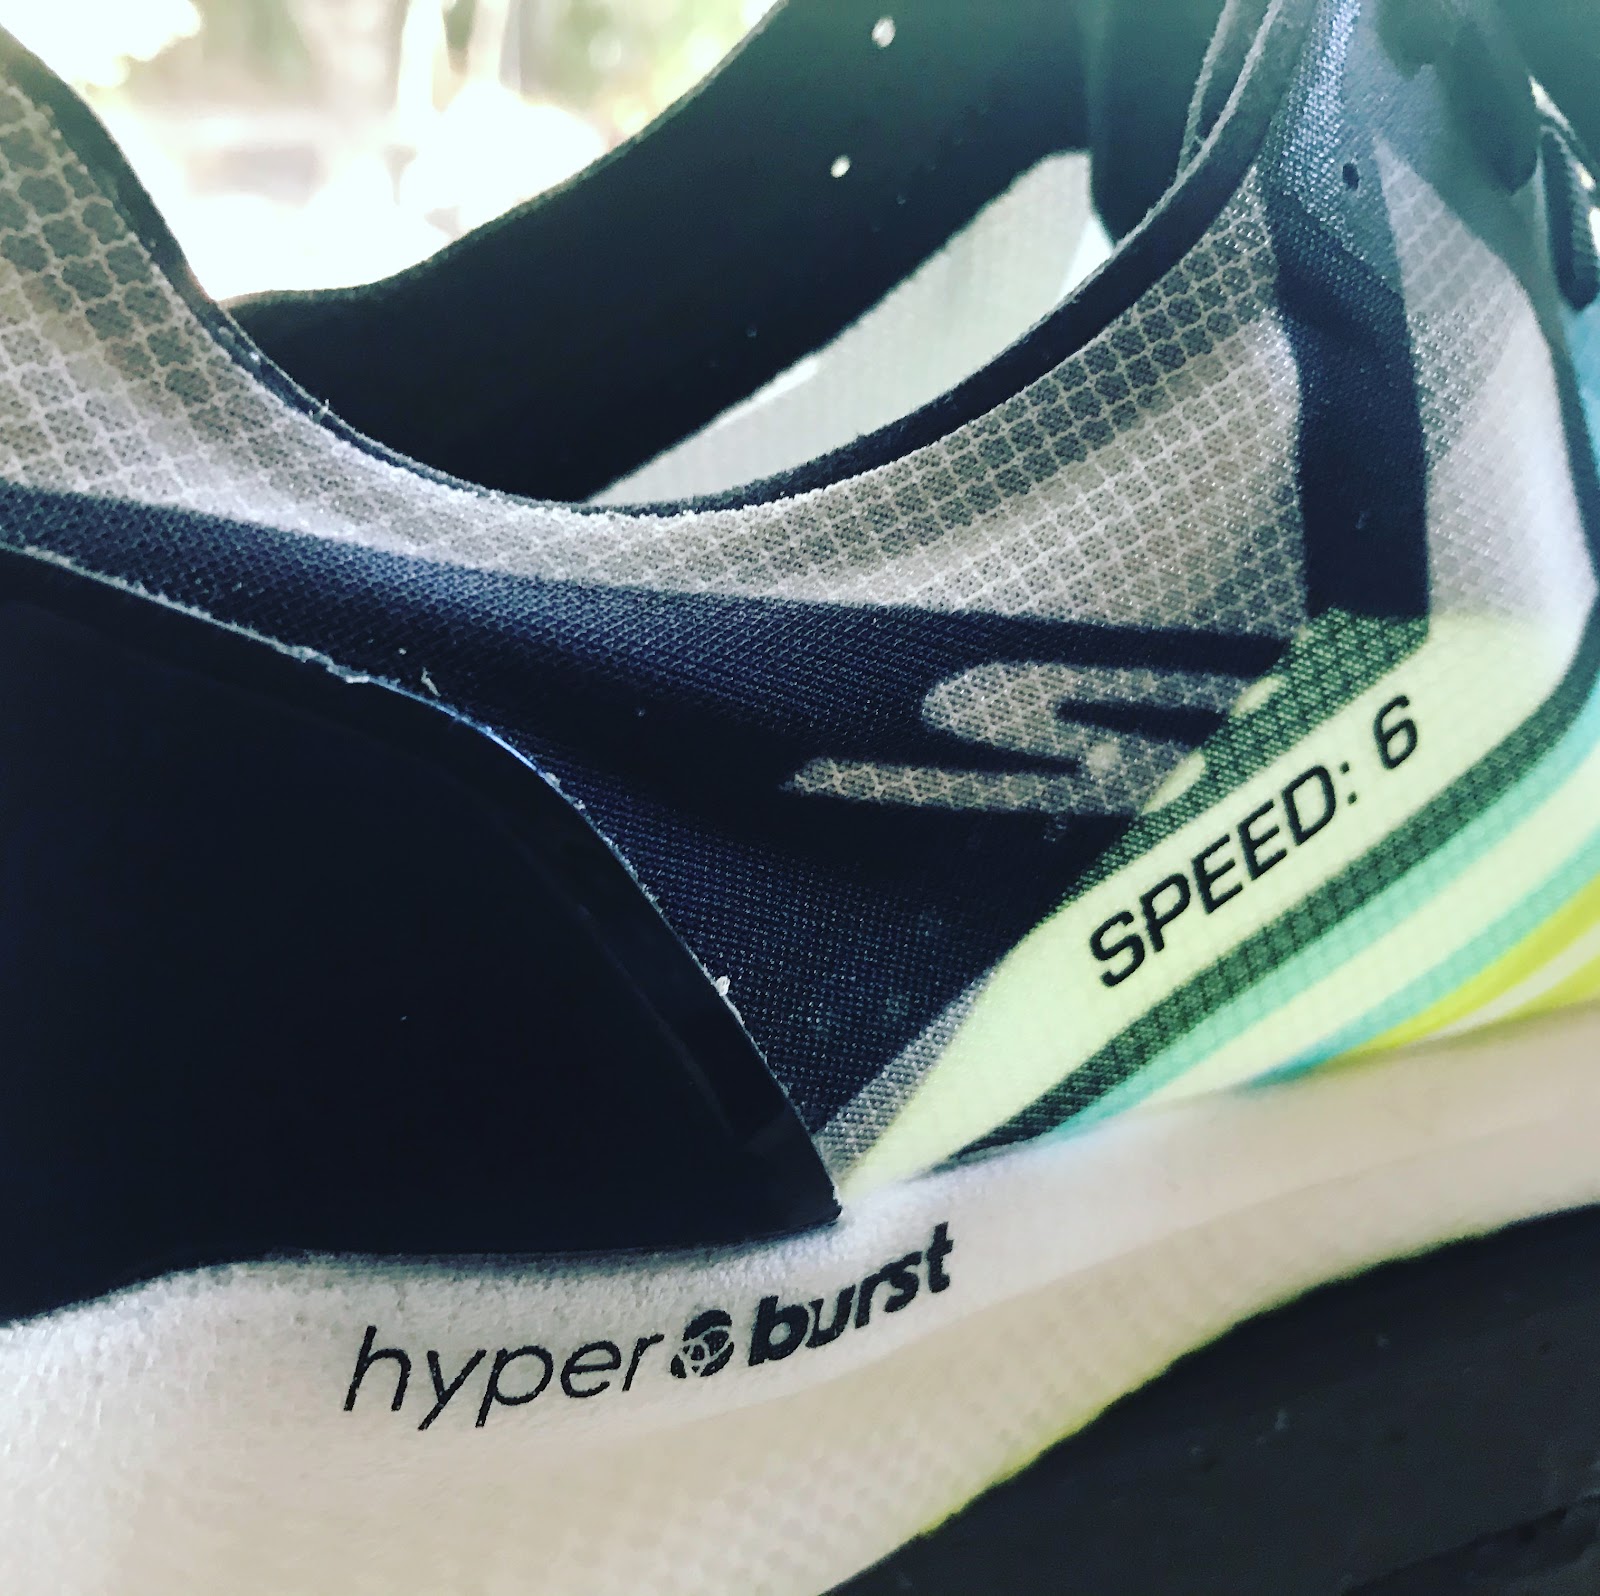 Road Trail Run: Skechers Performance Go Meb Speed 6 Hyper Multi Tester  Review. Speed Indeed!